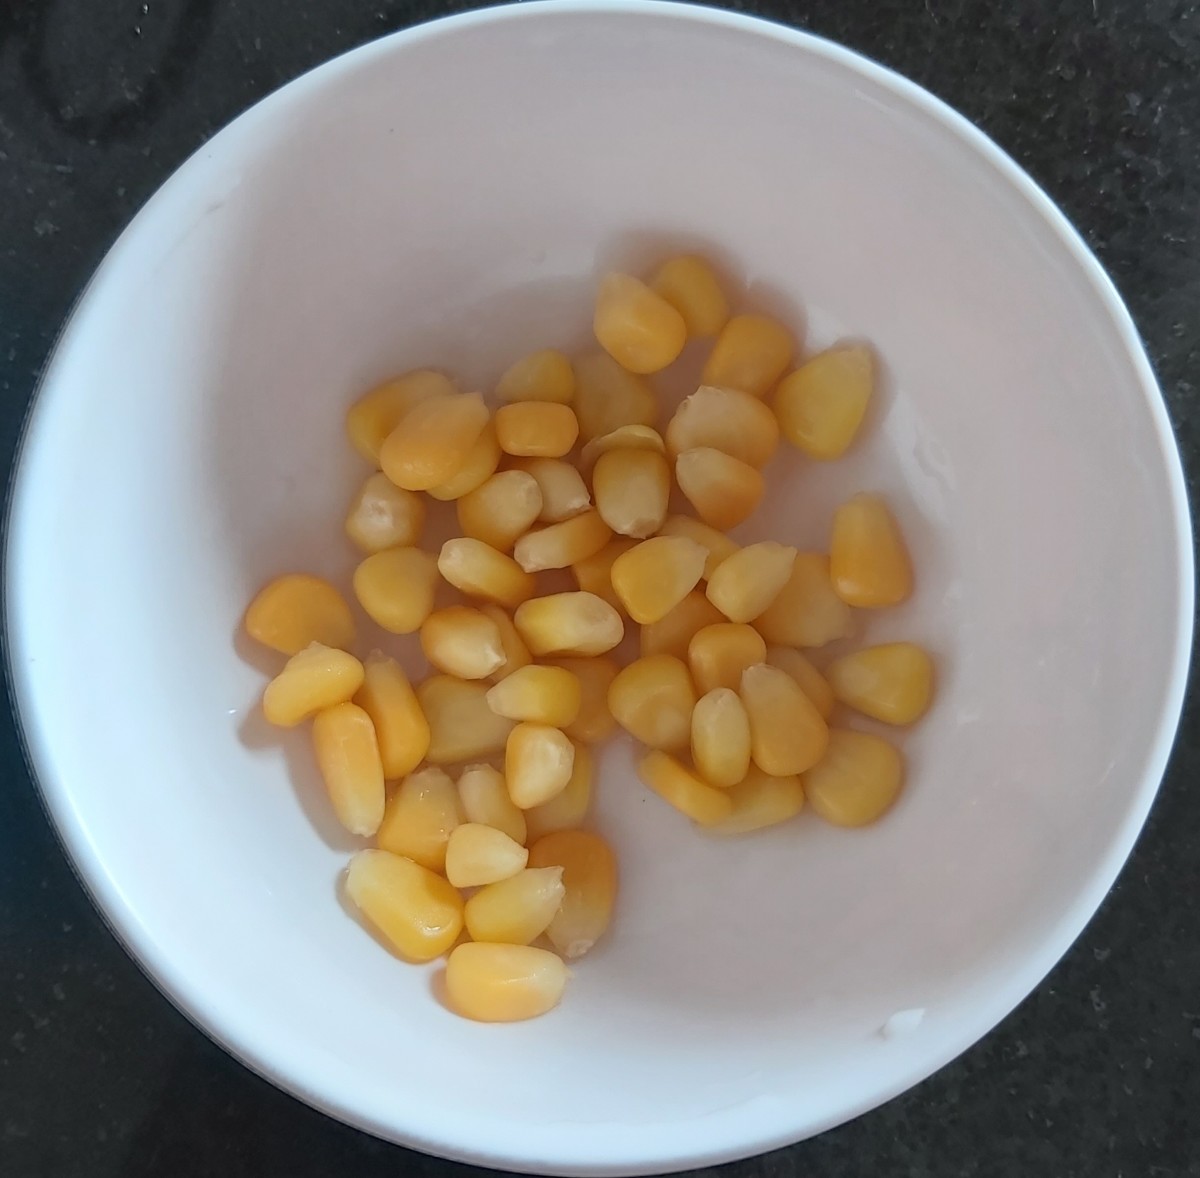 Wash 2-3 tablespoons of sweet  corn. Keep aside (i used frozen corn. You can use fresh corn too).